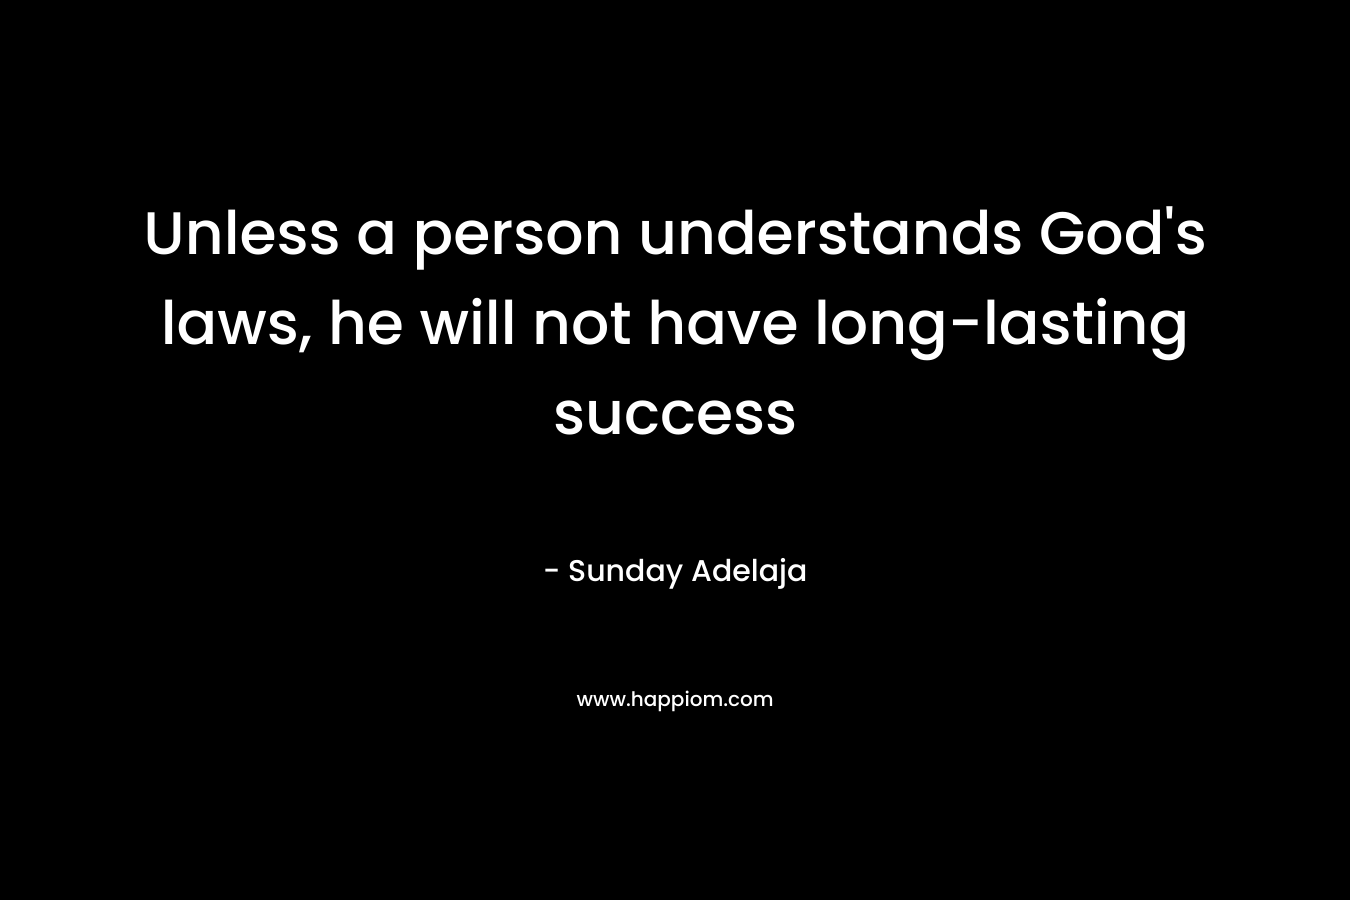 Unless a person understands God's laws, he will not have long-lasting success